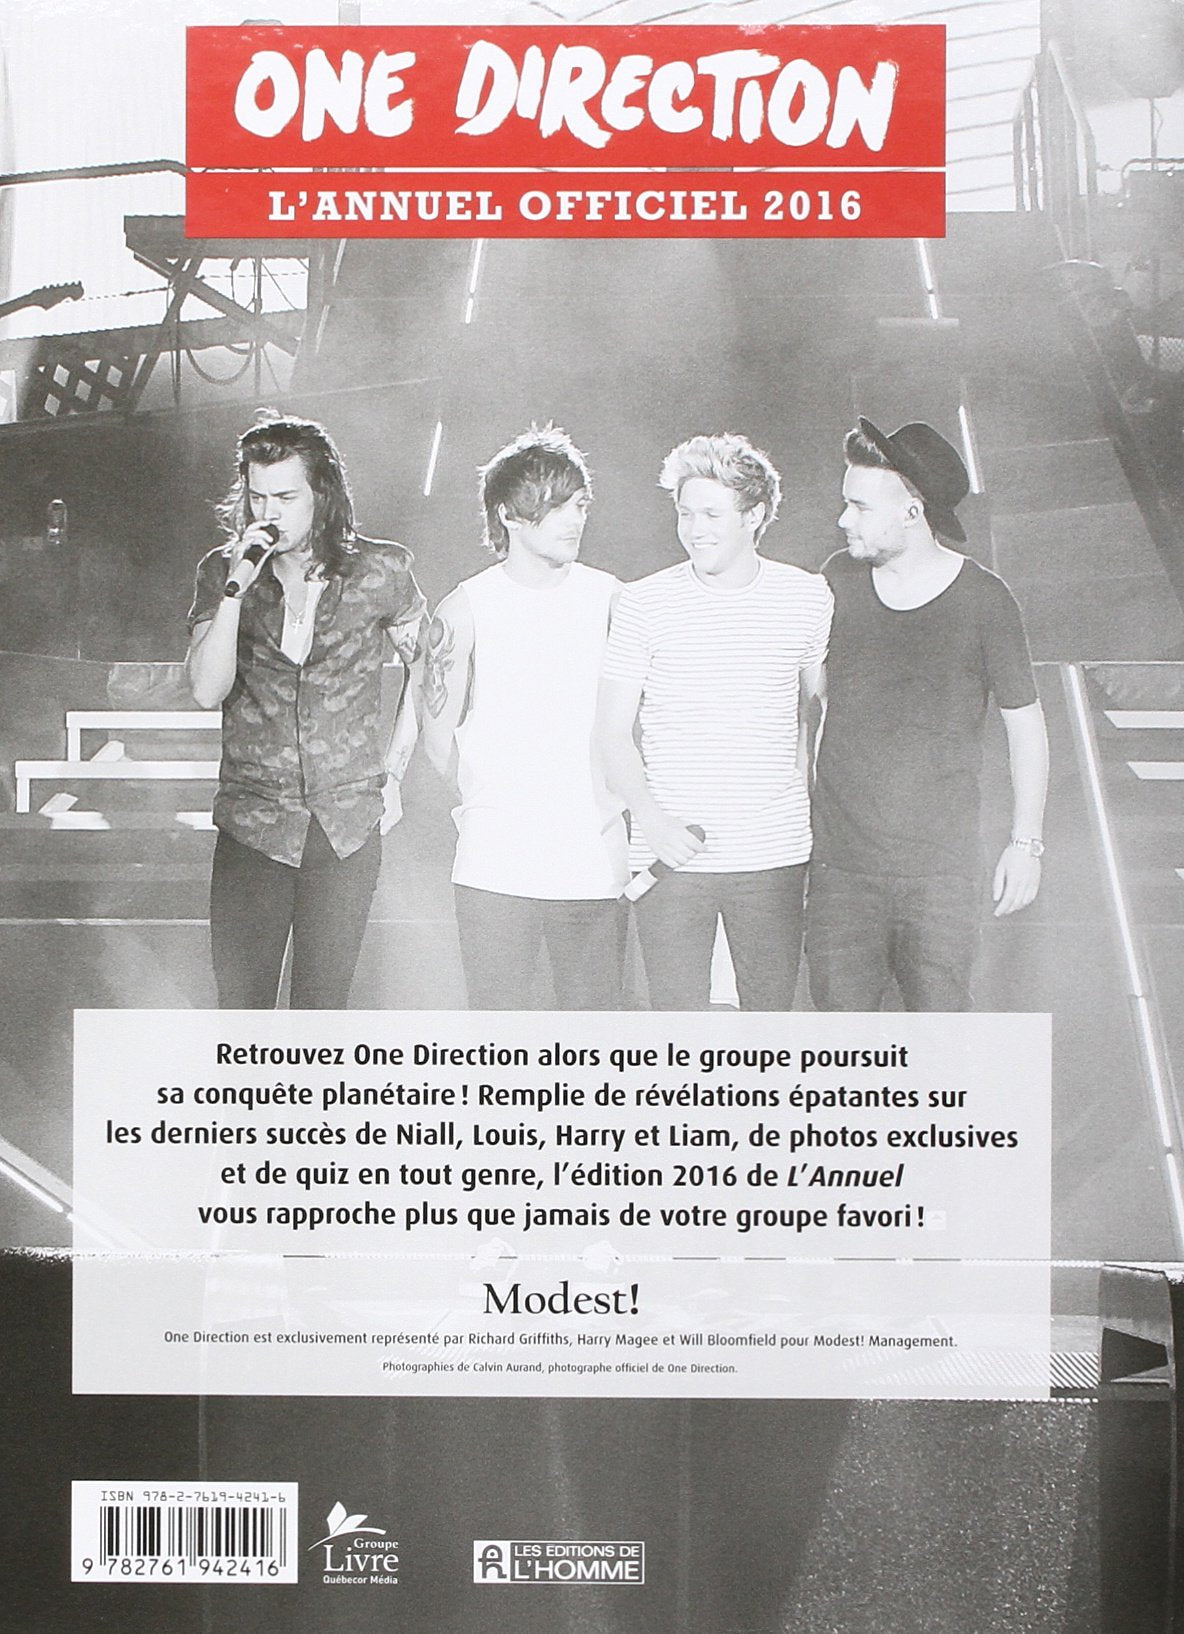 One Direction: L'annuel officel 2016 (One Direction)